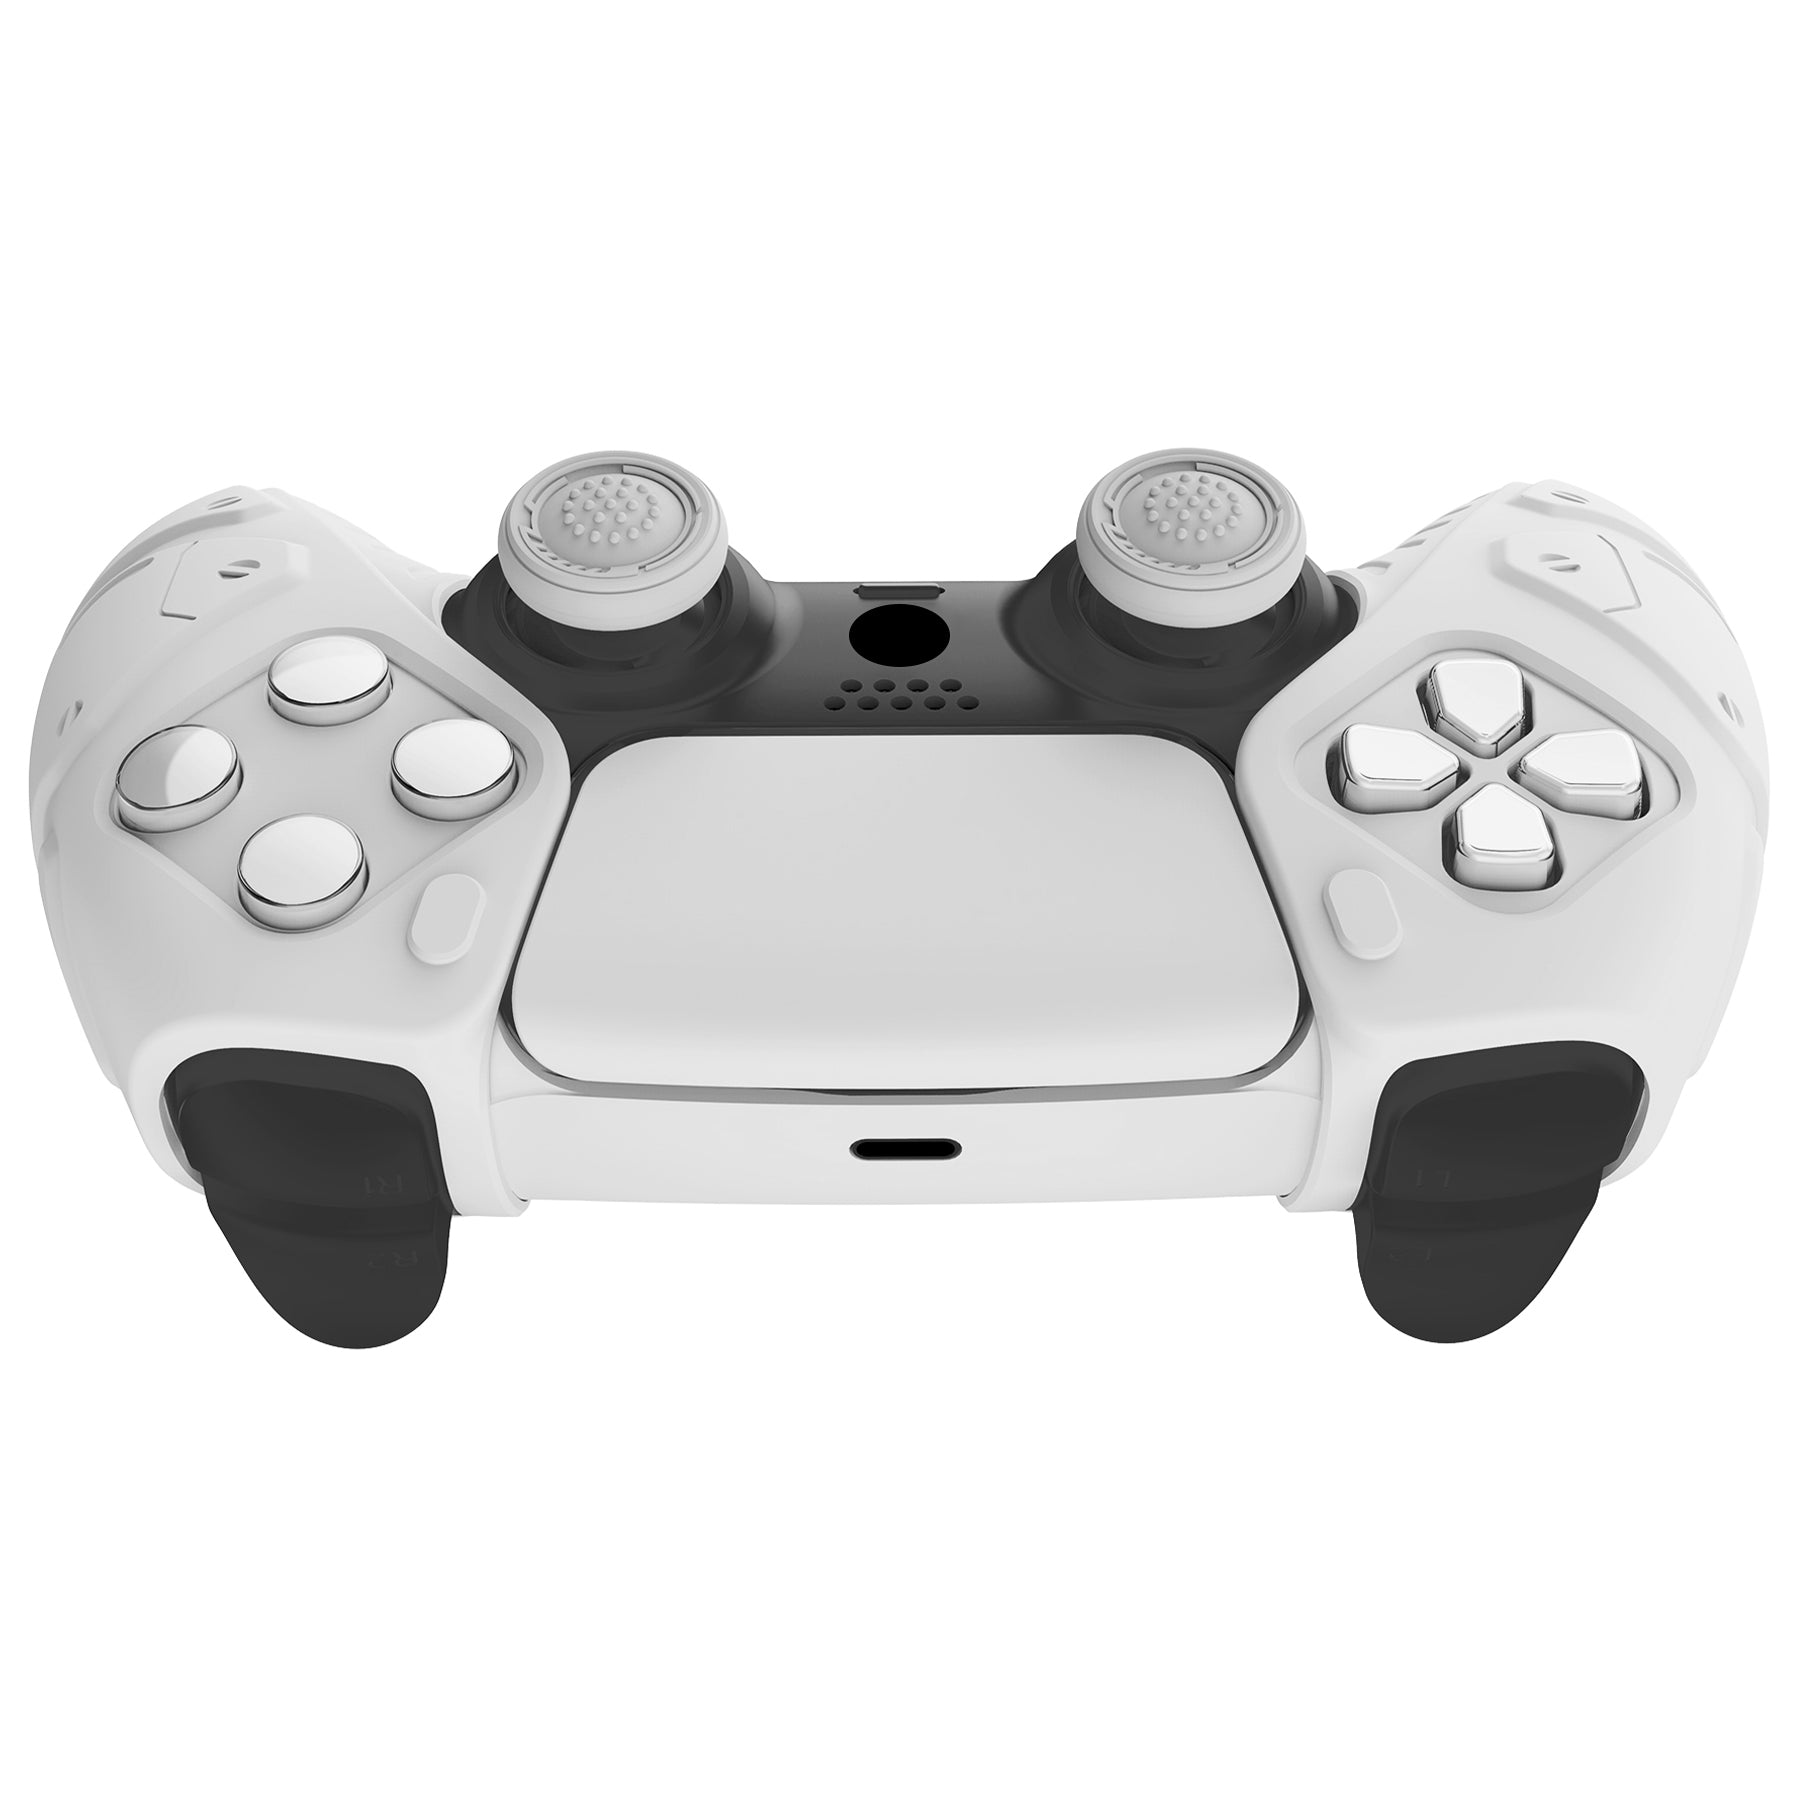 PlayVital Mecha Edition Anti-Slip Silicone Cover Skin with Thumb Grip Caps for PS5 Wireless Controller - Compatible with Charging Station - White - JGPF002 PlayVital